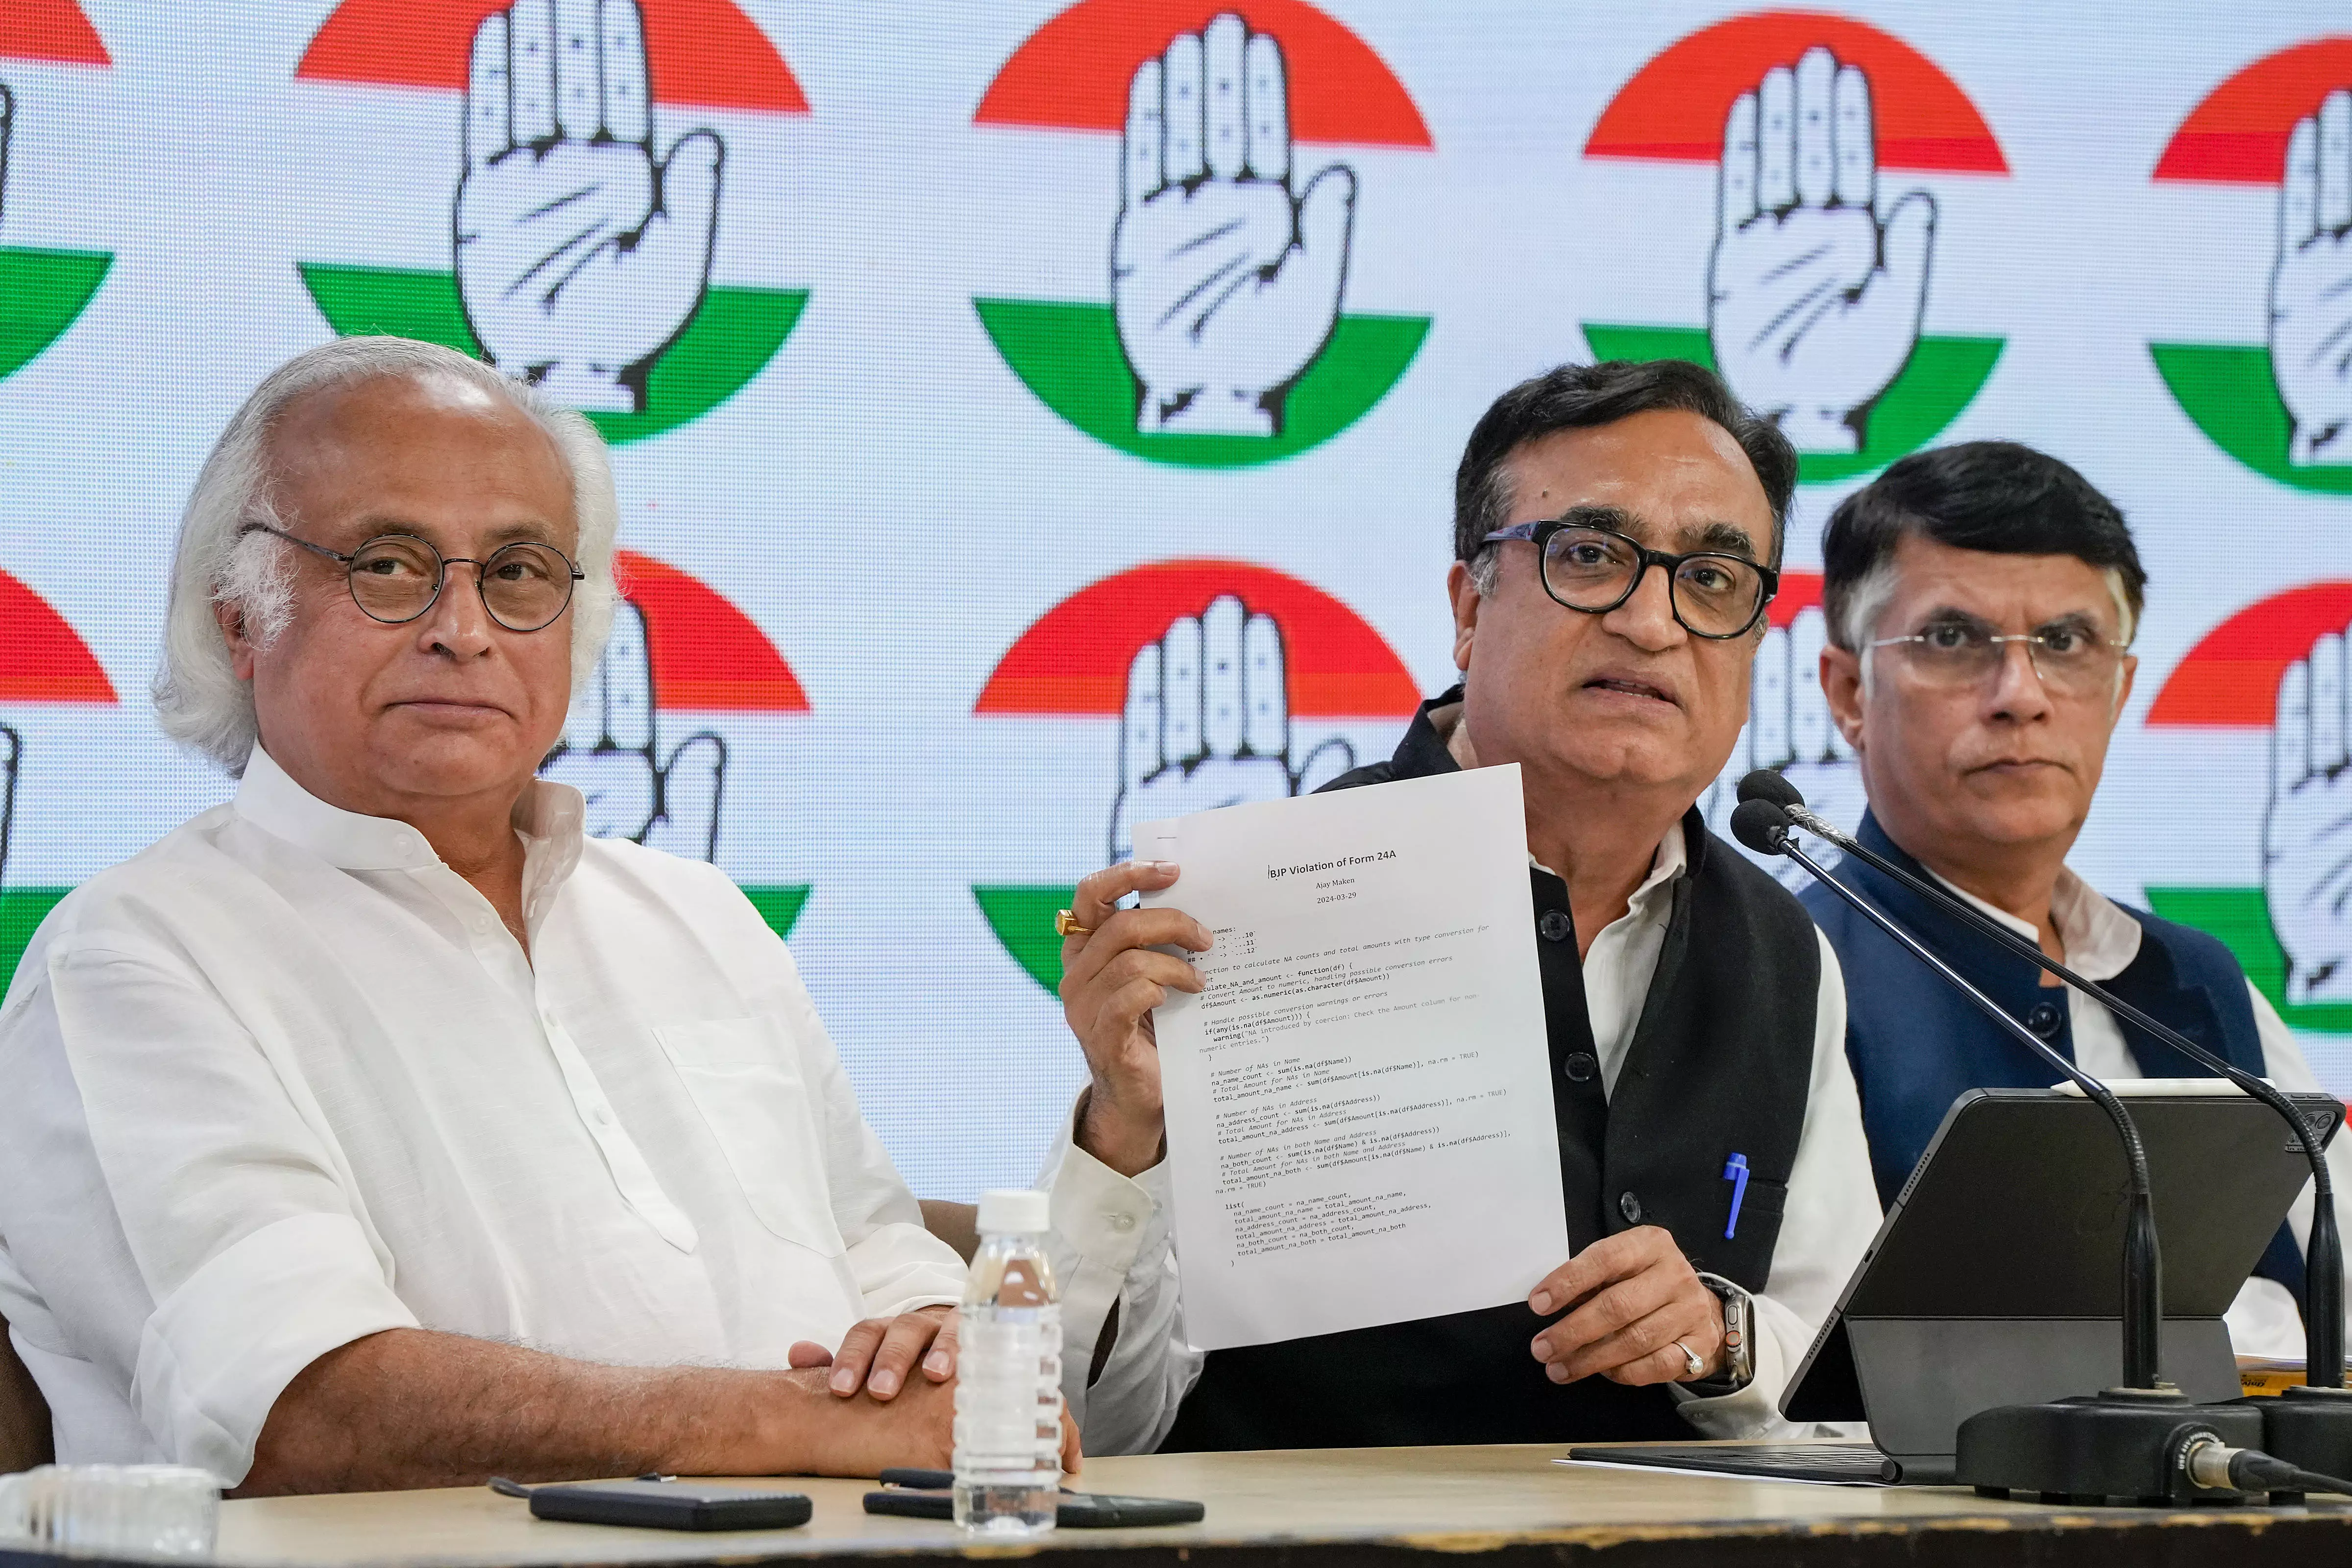 Tax terrorism, says Congress, after asked to pay Rs 1,700 crore